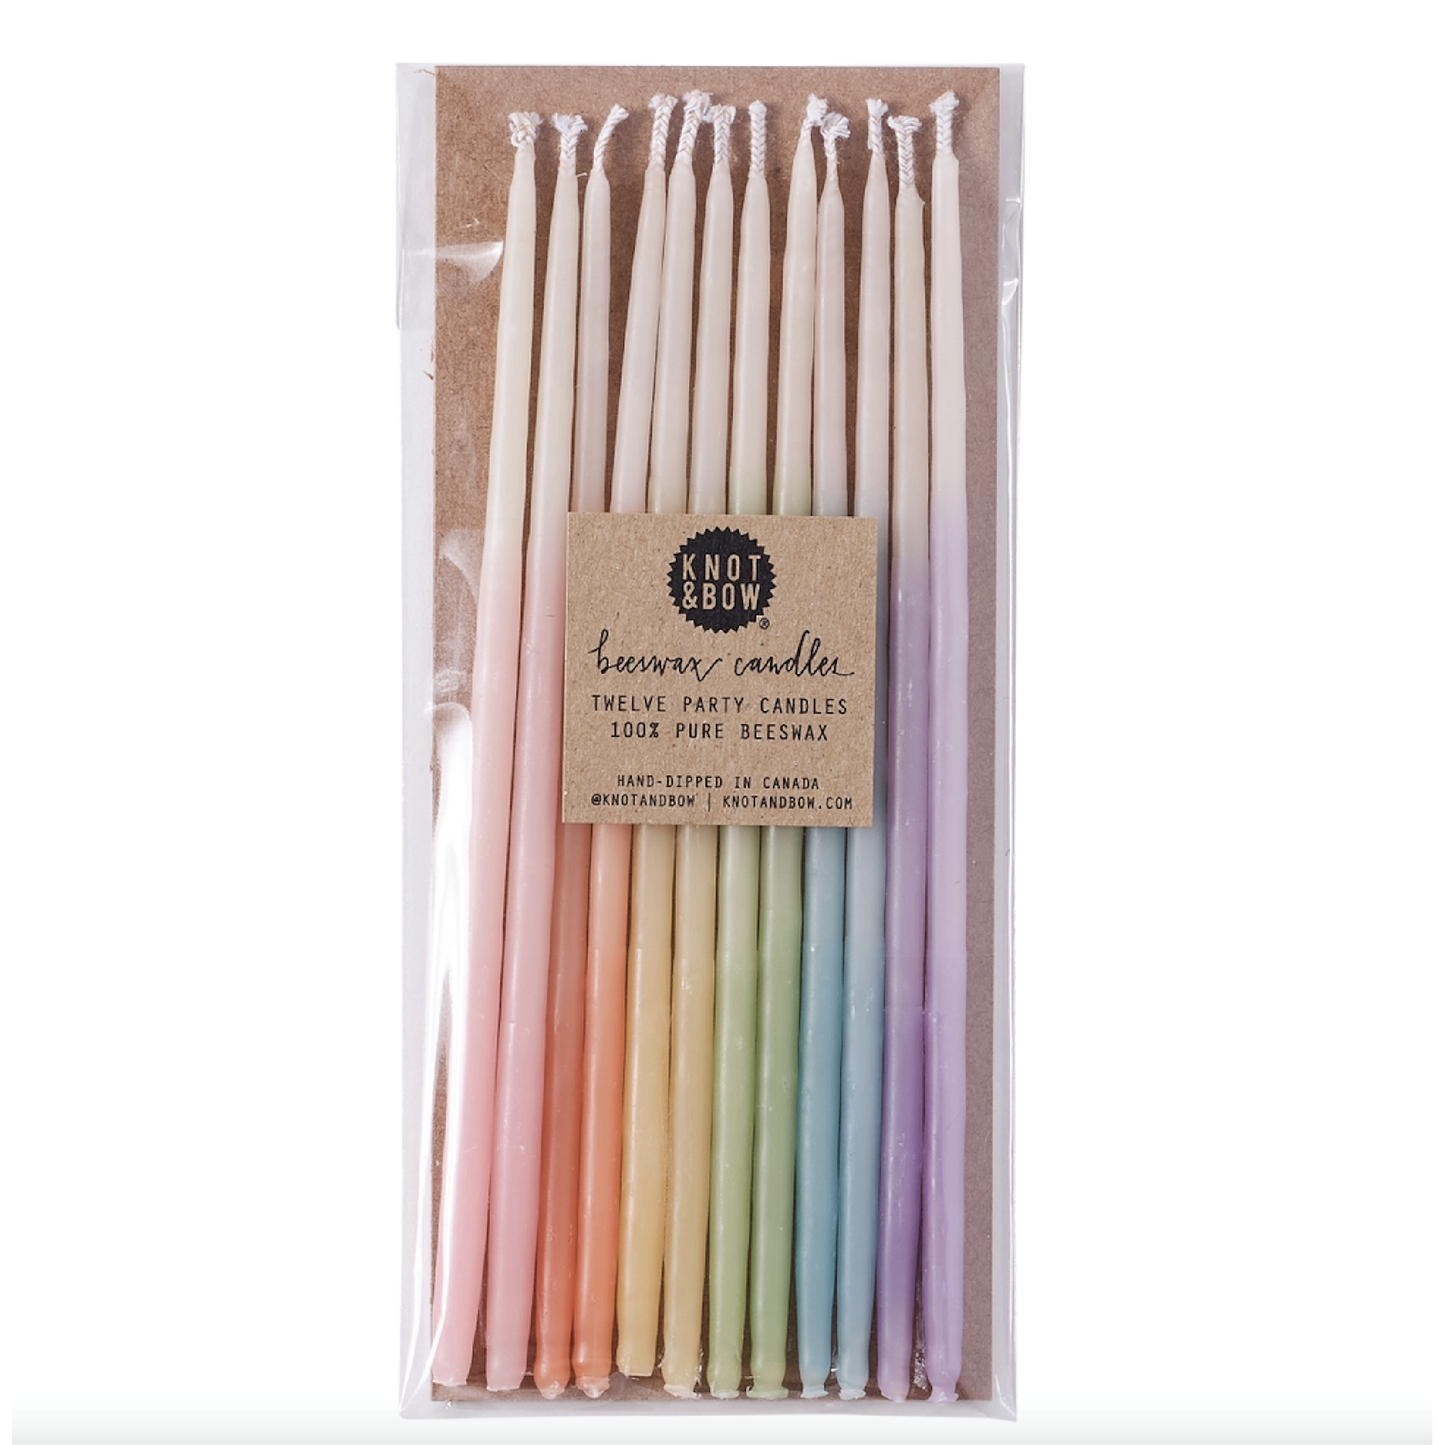 SALE - Ombre Assorted Tall Beeswax Birthday Candles